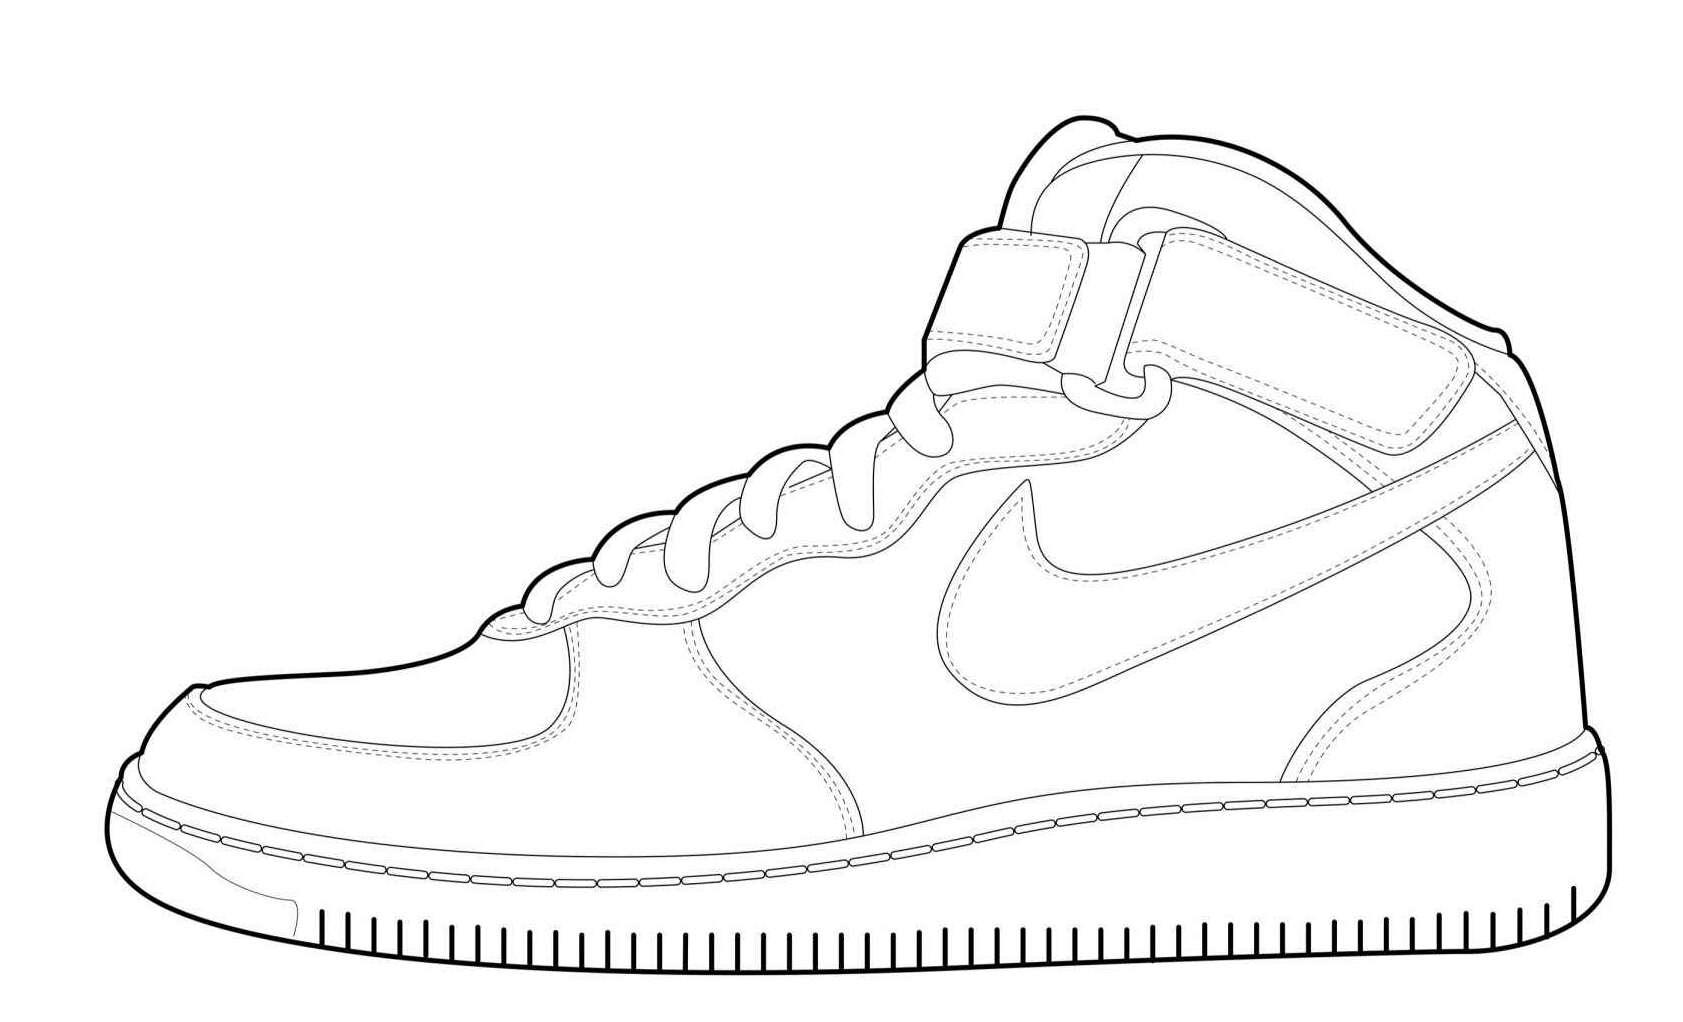 Nike Shoes 9 Coloring Pages - Coloring Cool